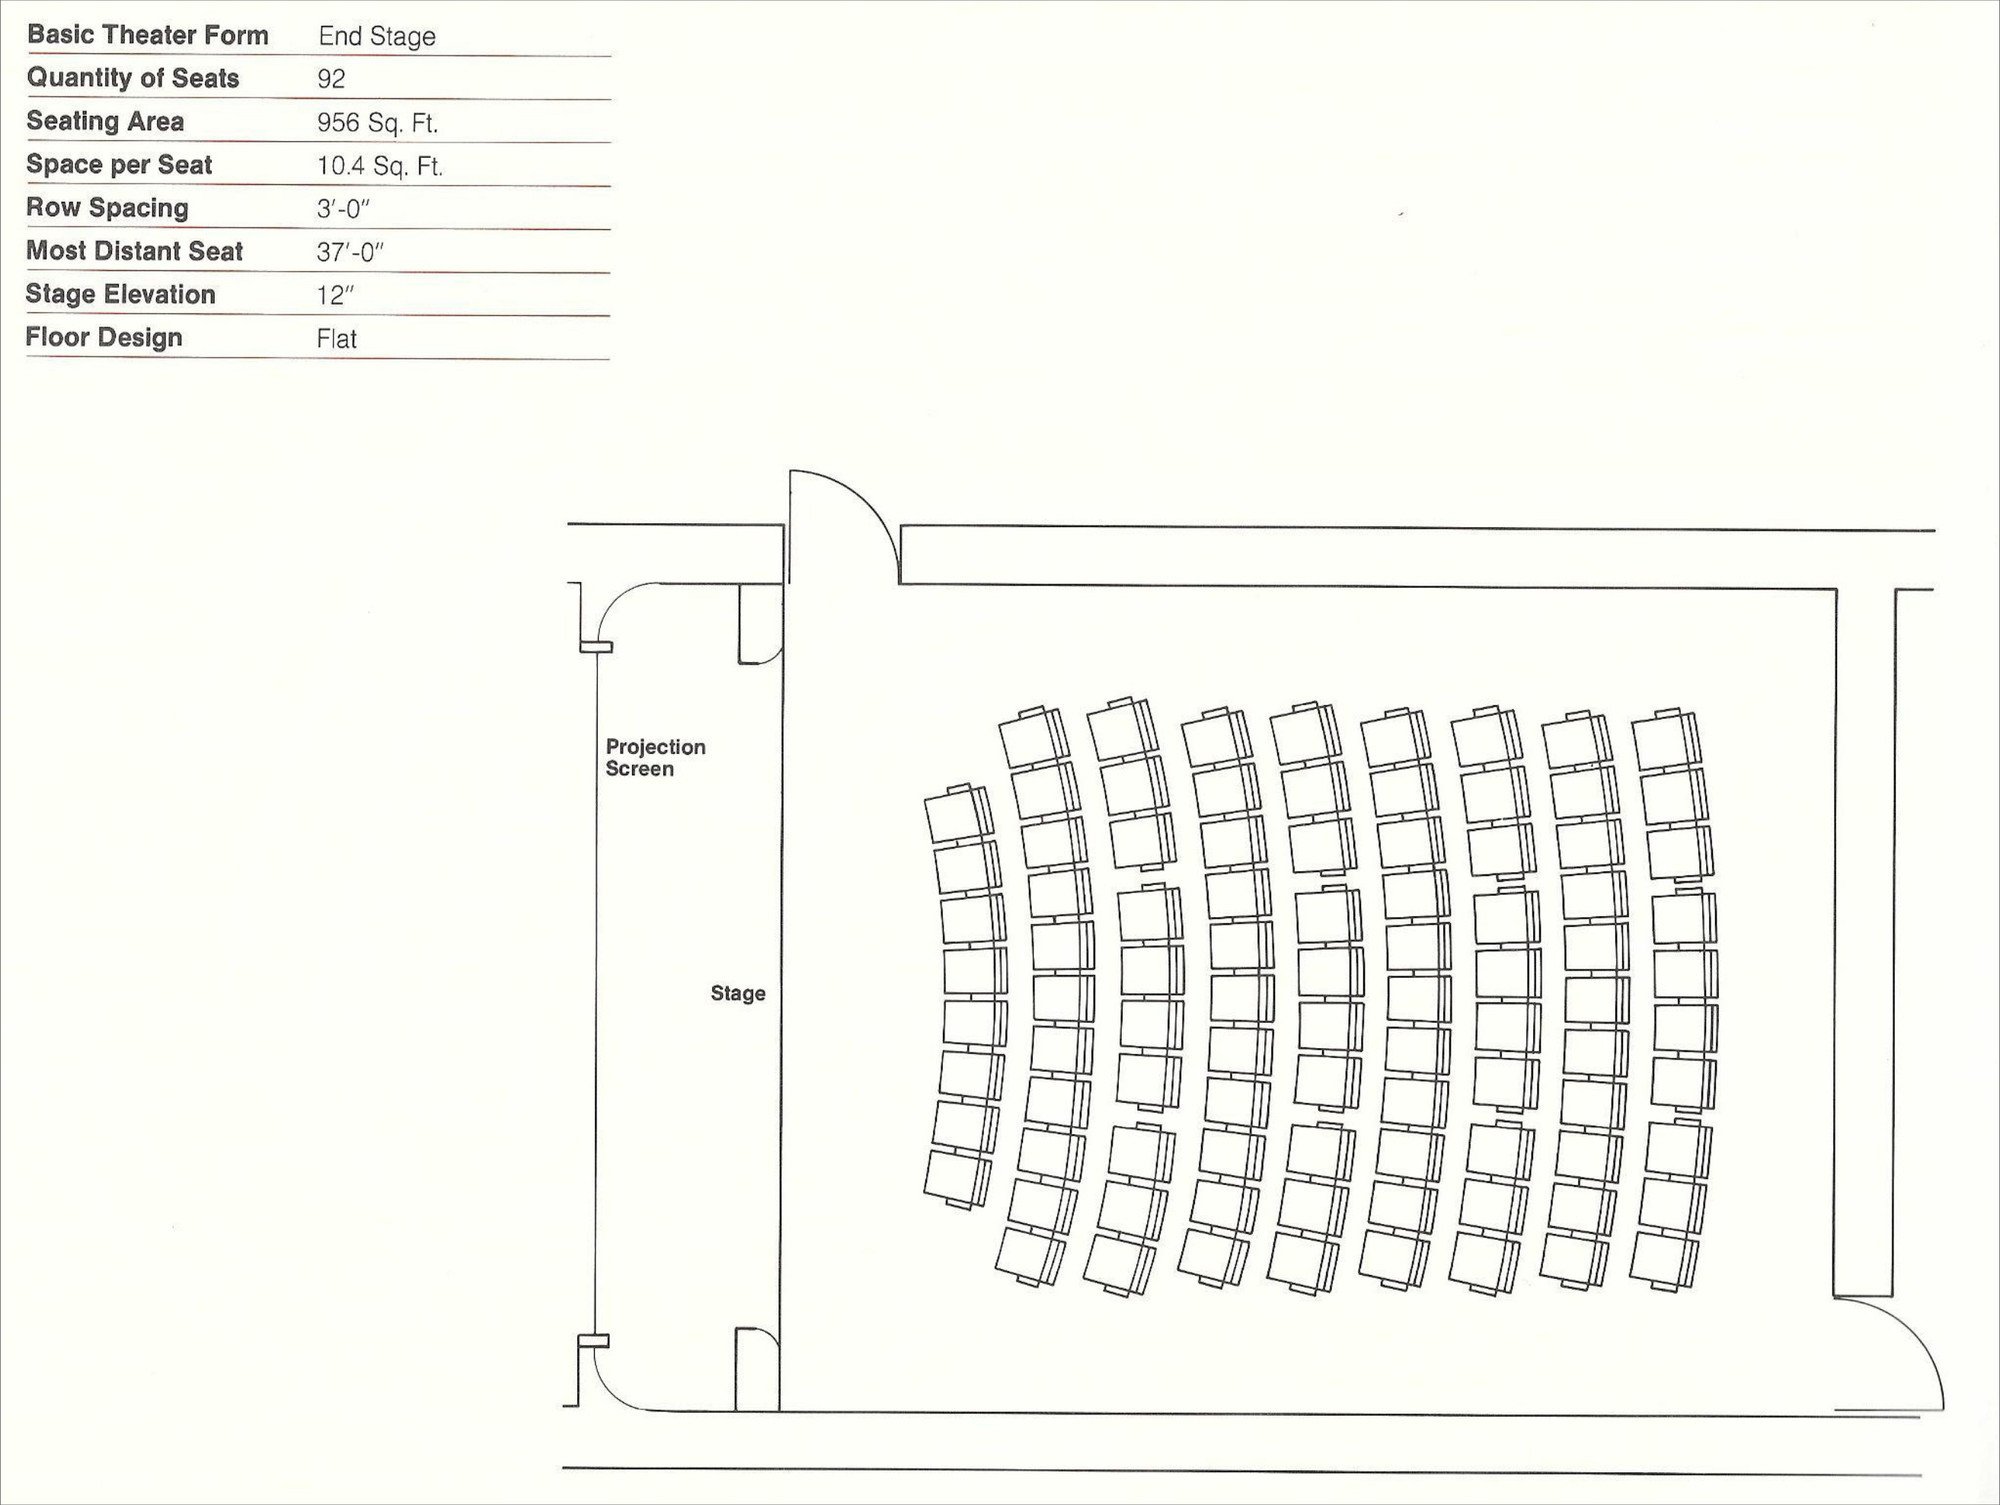 Gallery of How to Design Theater Seating Shown Through 21